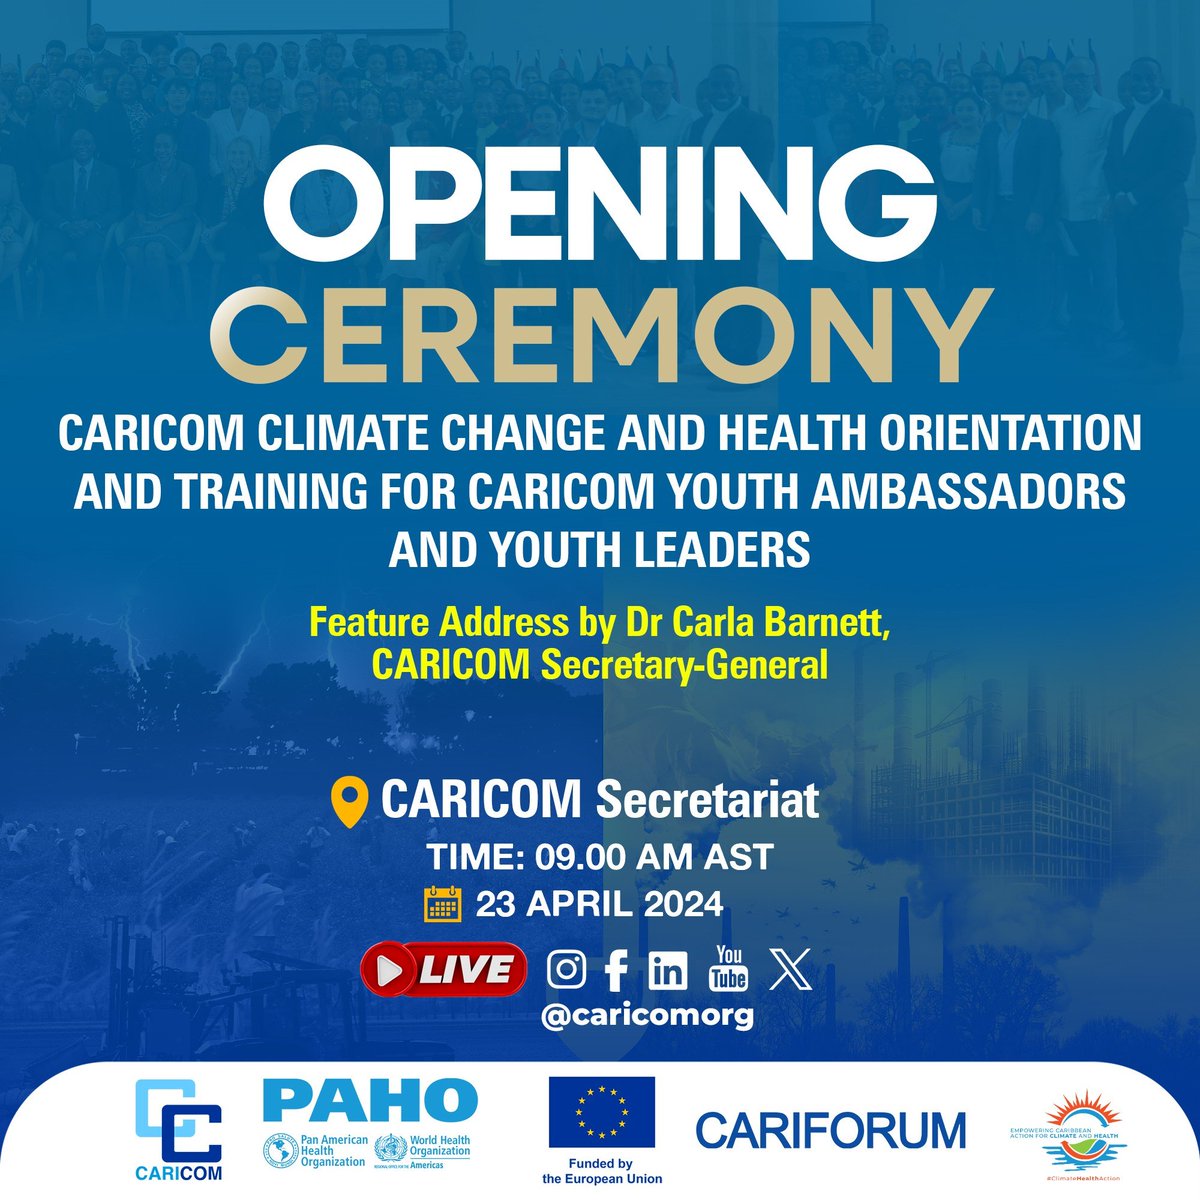 #CARICOM is equipping our young people to respond to climate change and related health concerns. Join us virtually on Tuesday 23 April for the opening ceremony to this week's workshop at the Secretariat🇬🇾